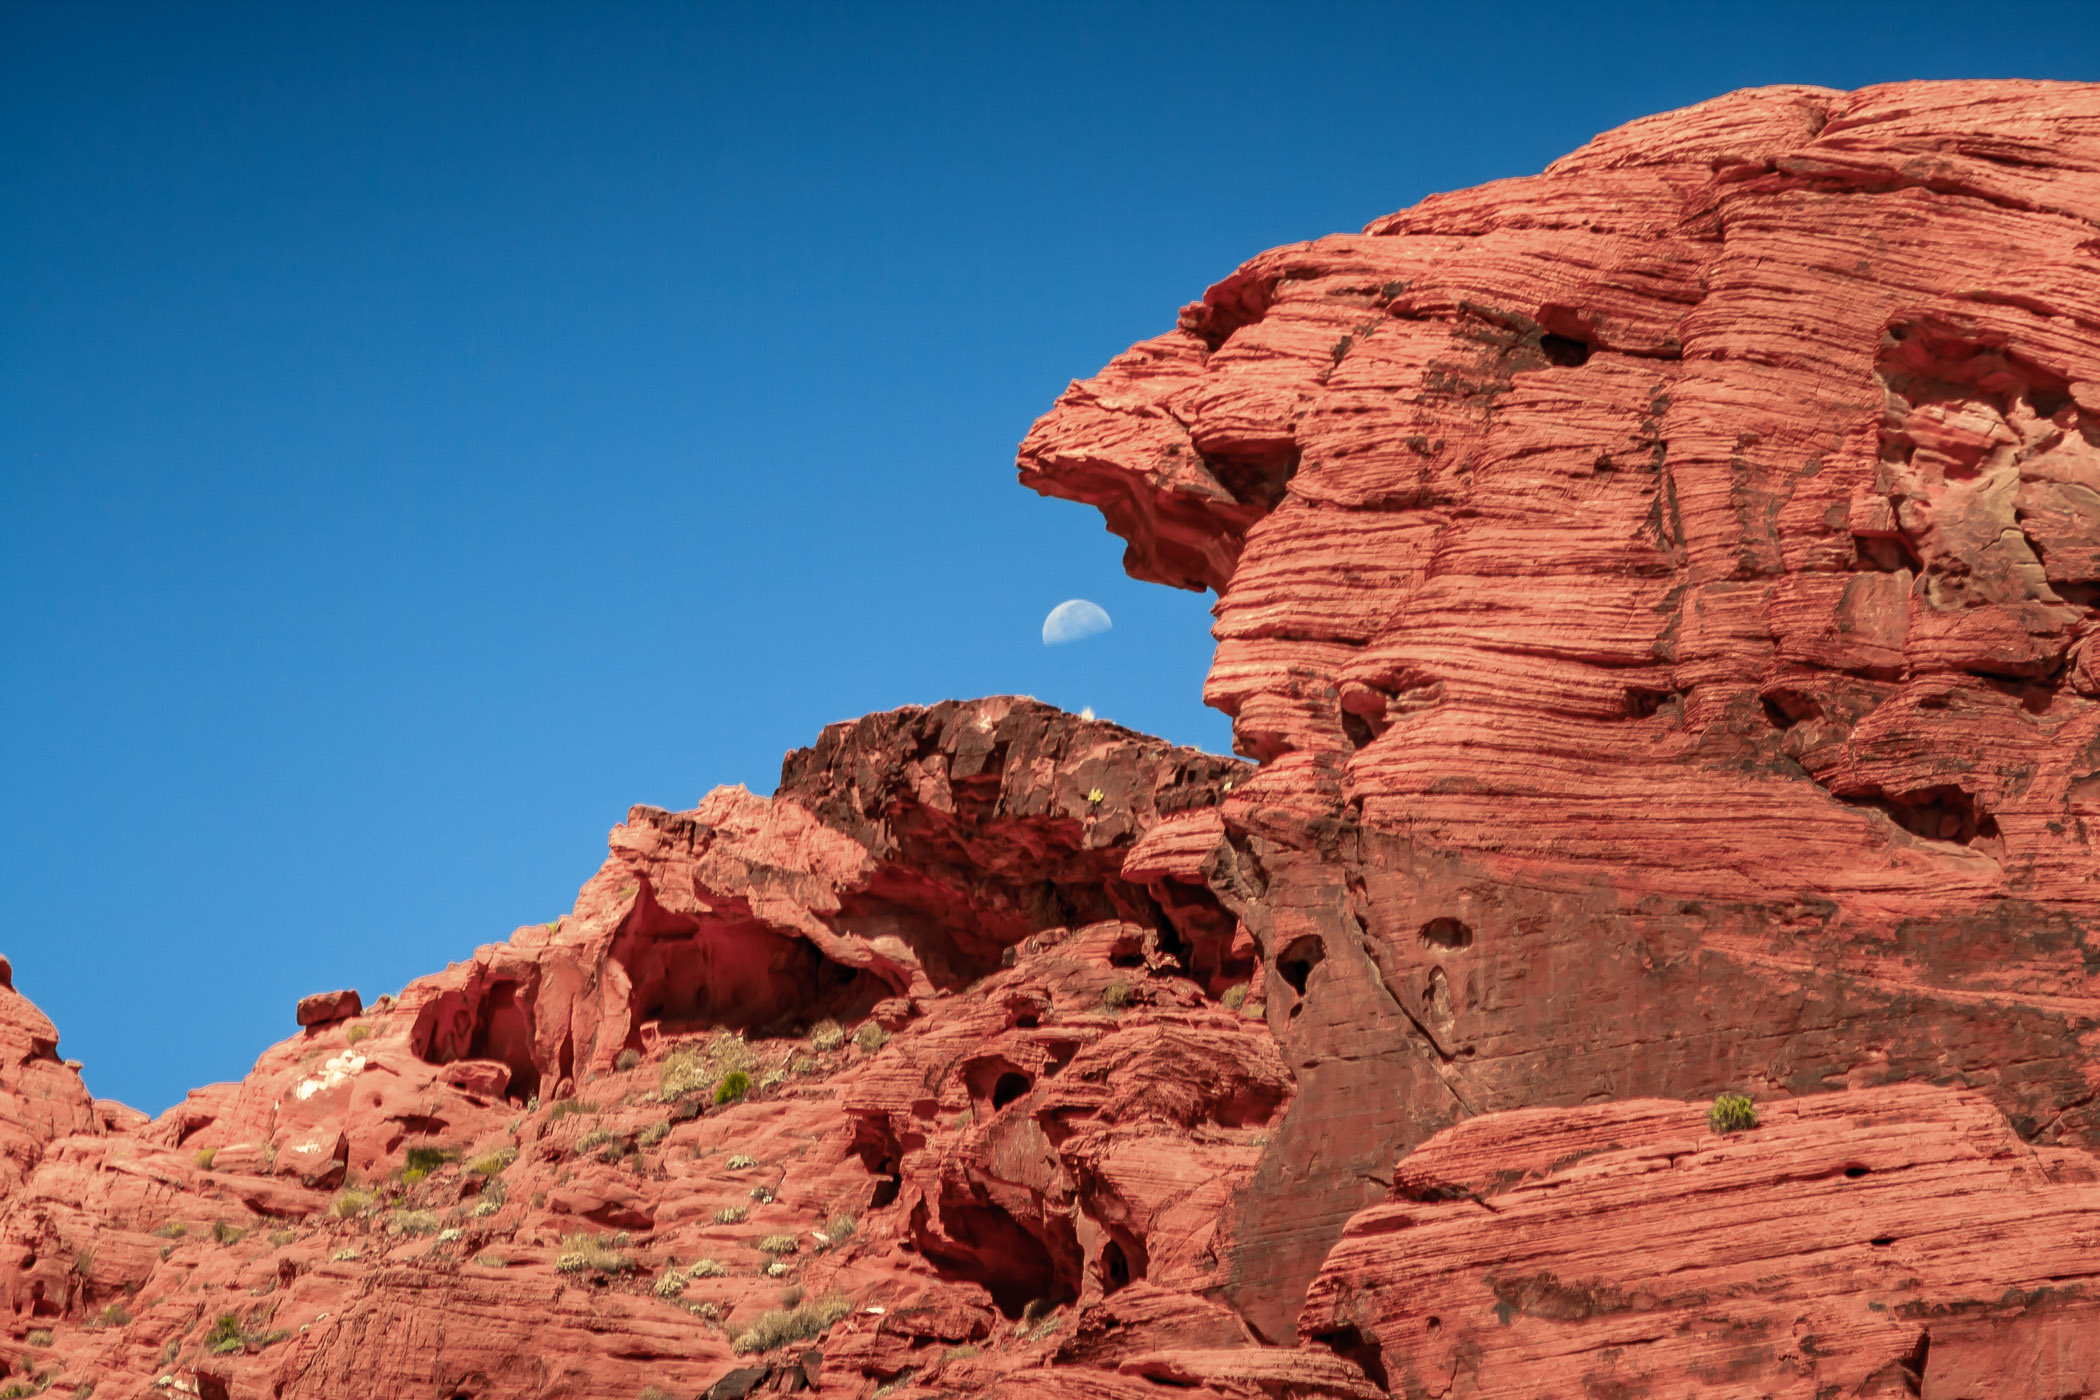 Rock monoliths seem to be ready to eat the moon at the Valley of Fire, Nevada.